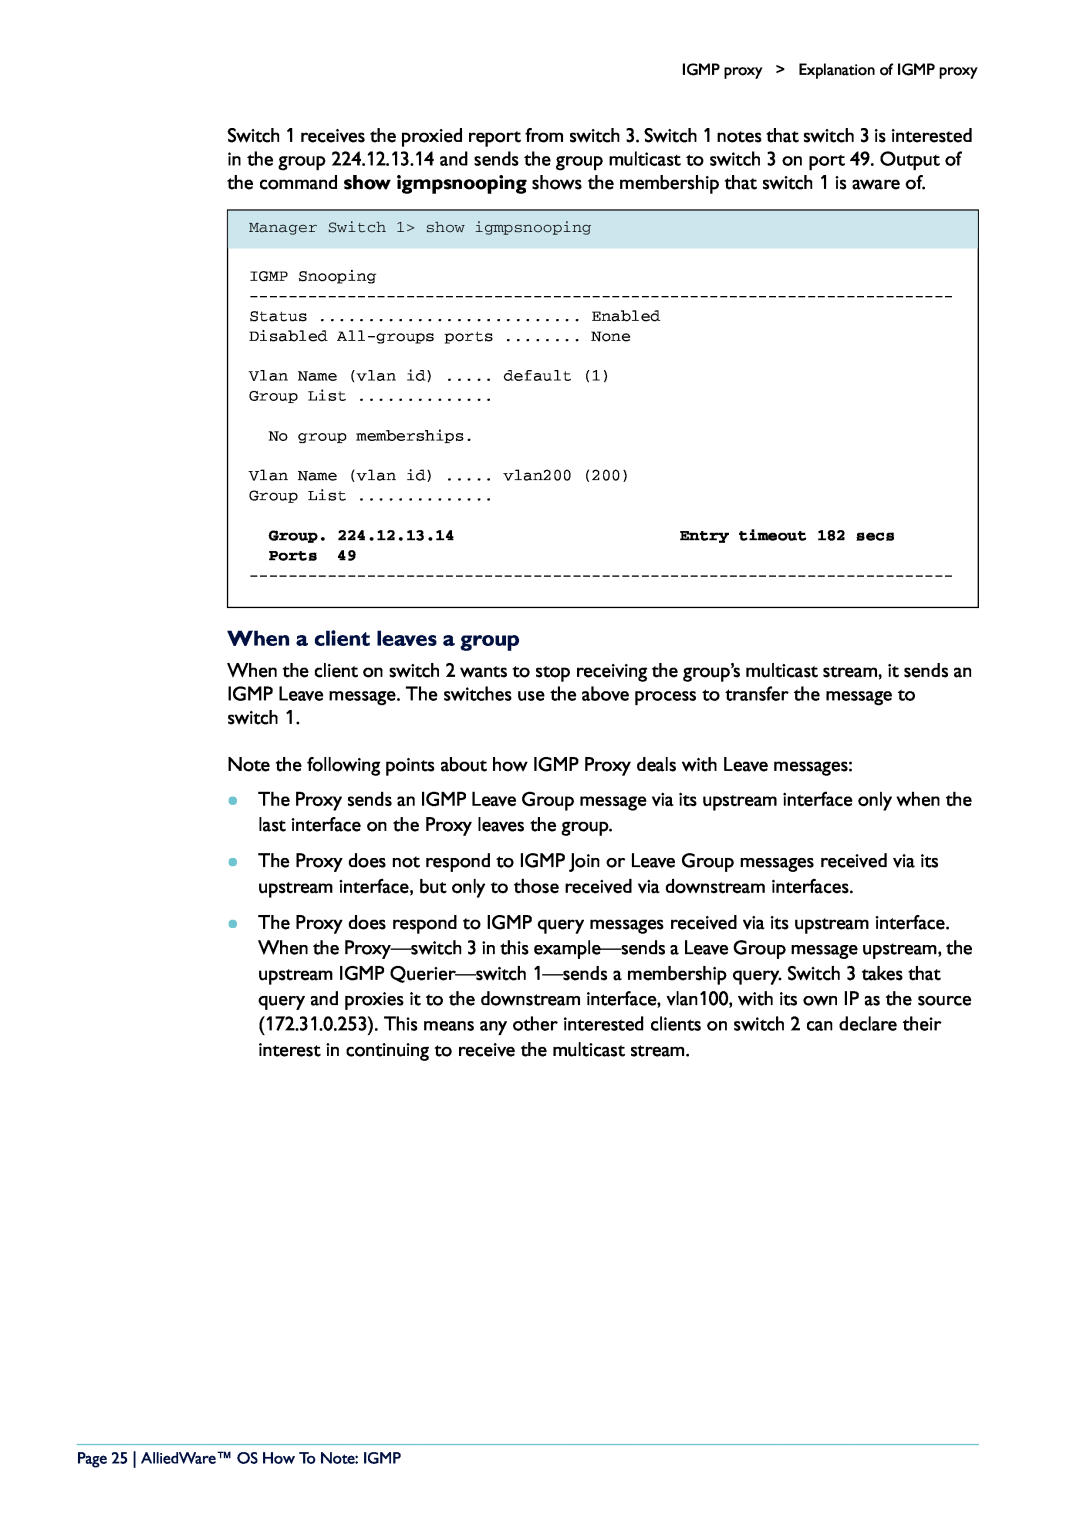 Allied Telesis AR400 manual When a client leaves a group, Page 25 AlliedWare OS How To Note IGMP 